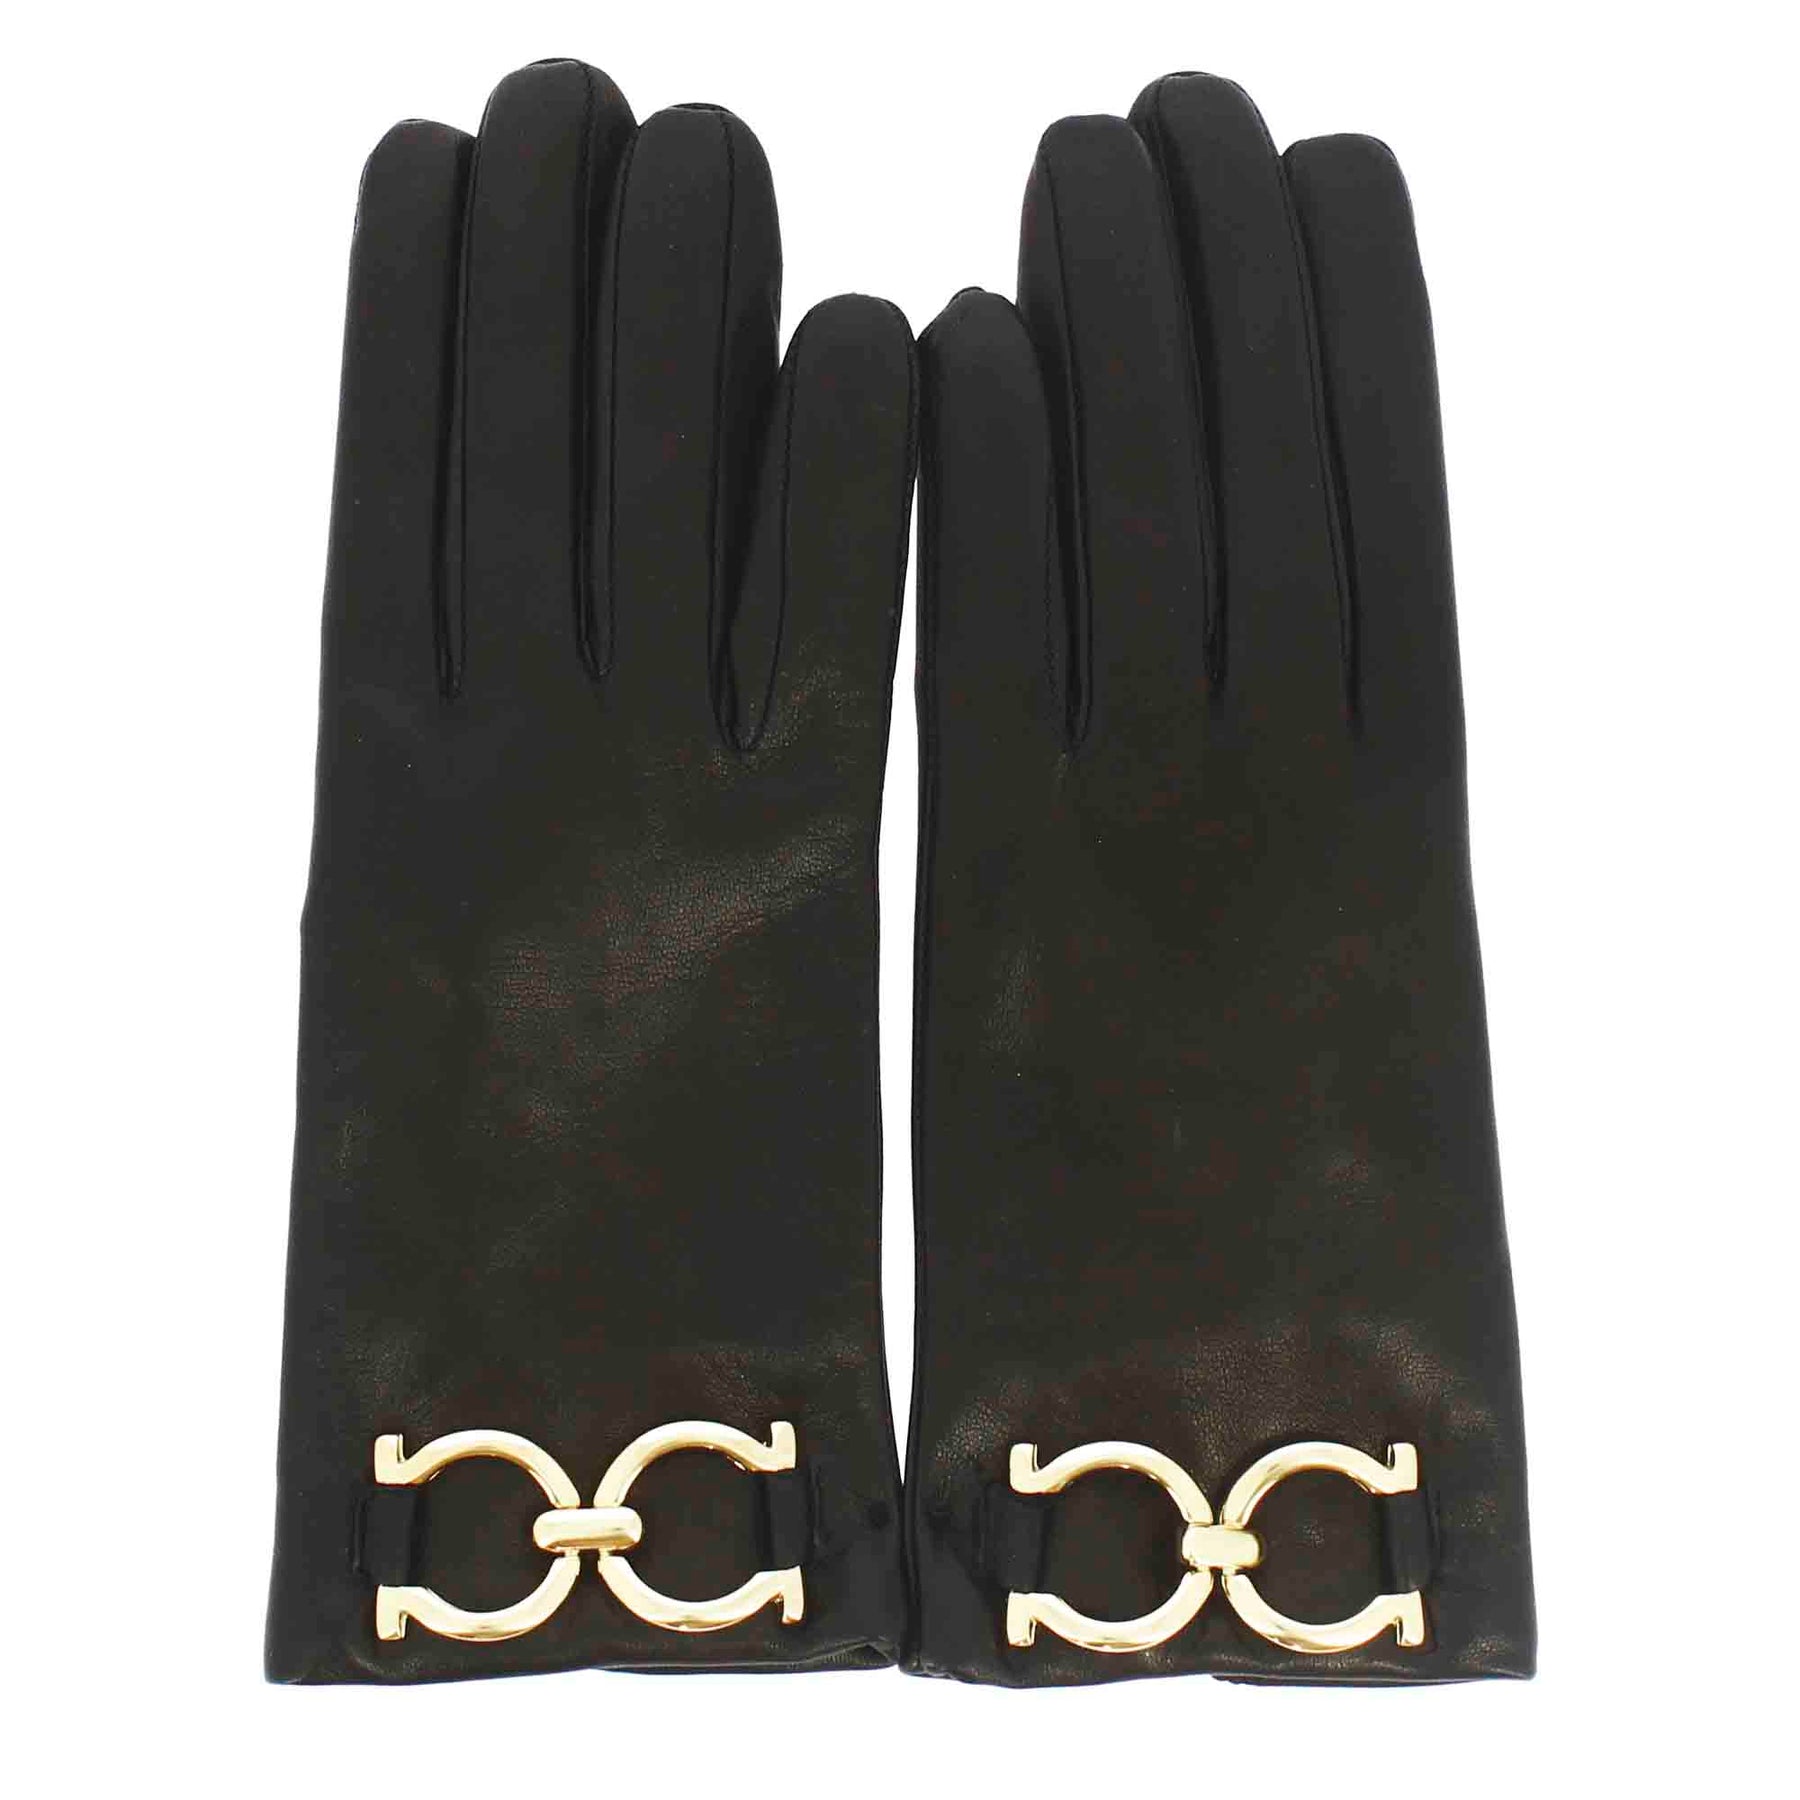 Women's glove in black leather with gold horsebit and cashmere lining